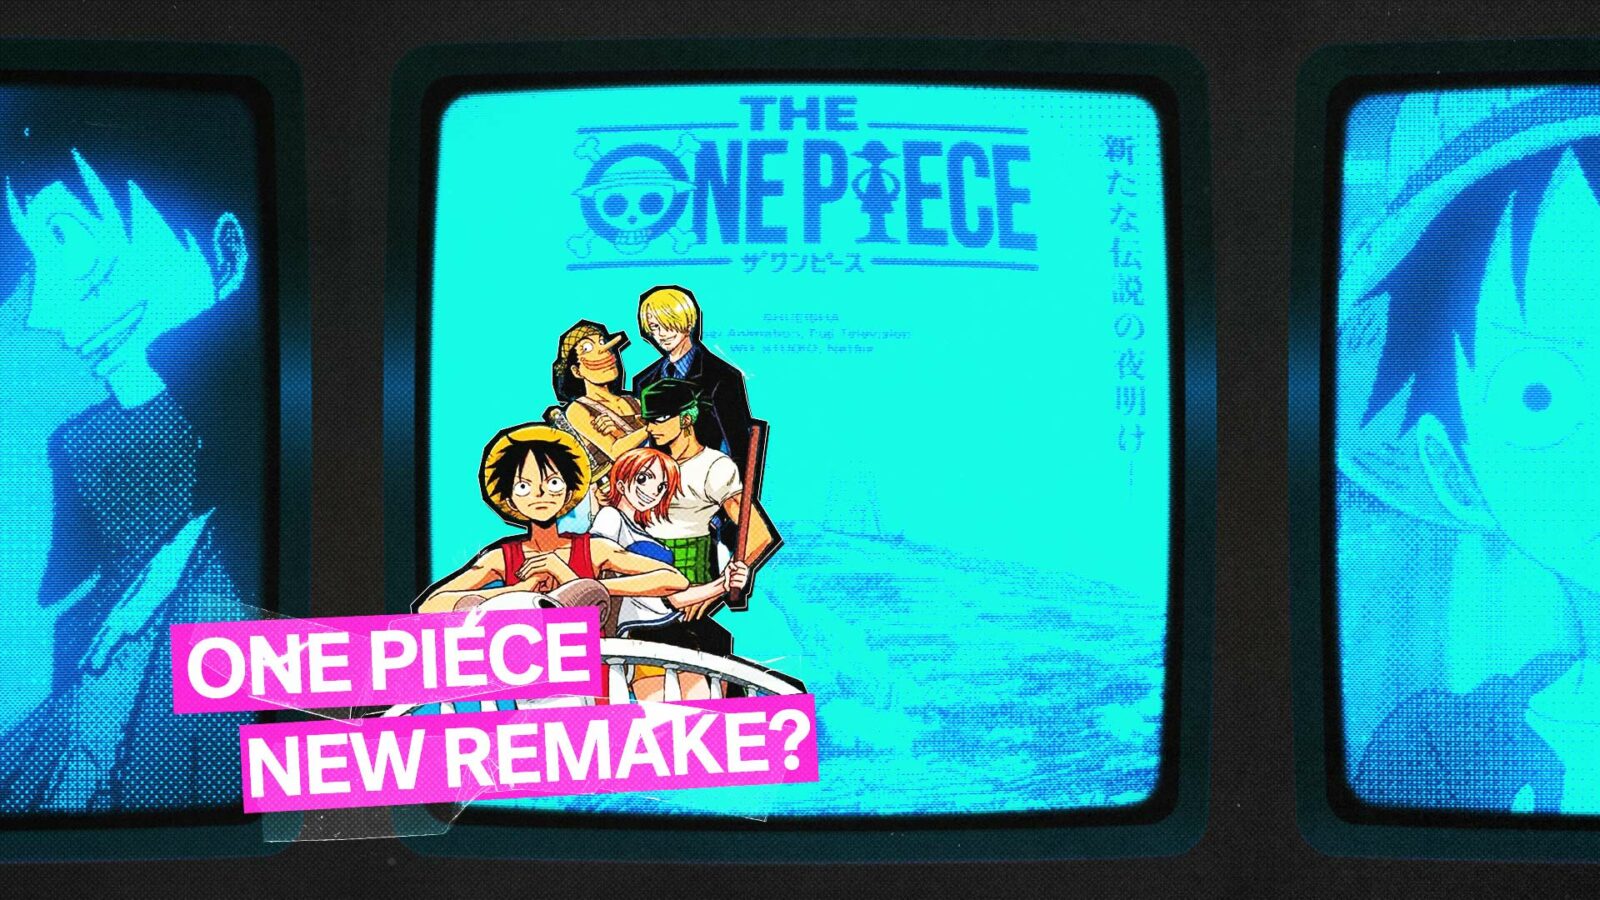 Hit Anime ‘One Piece’ Is Getting A New Remake!